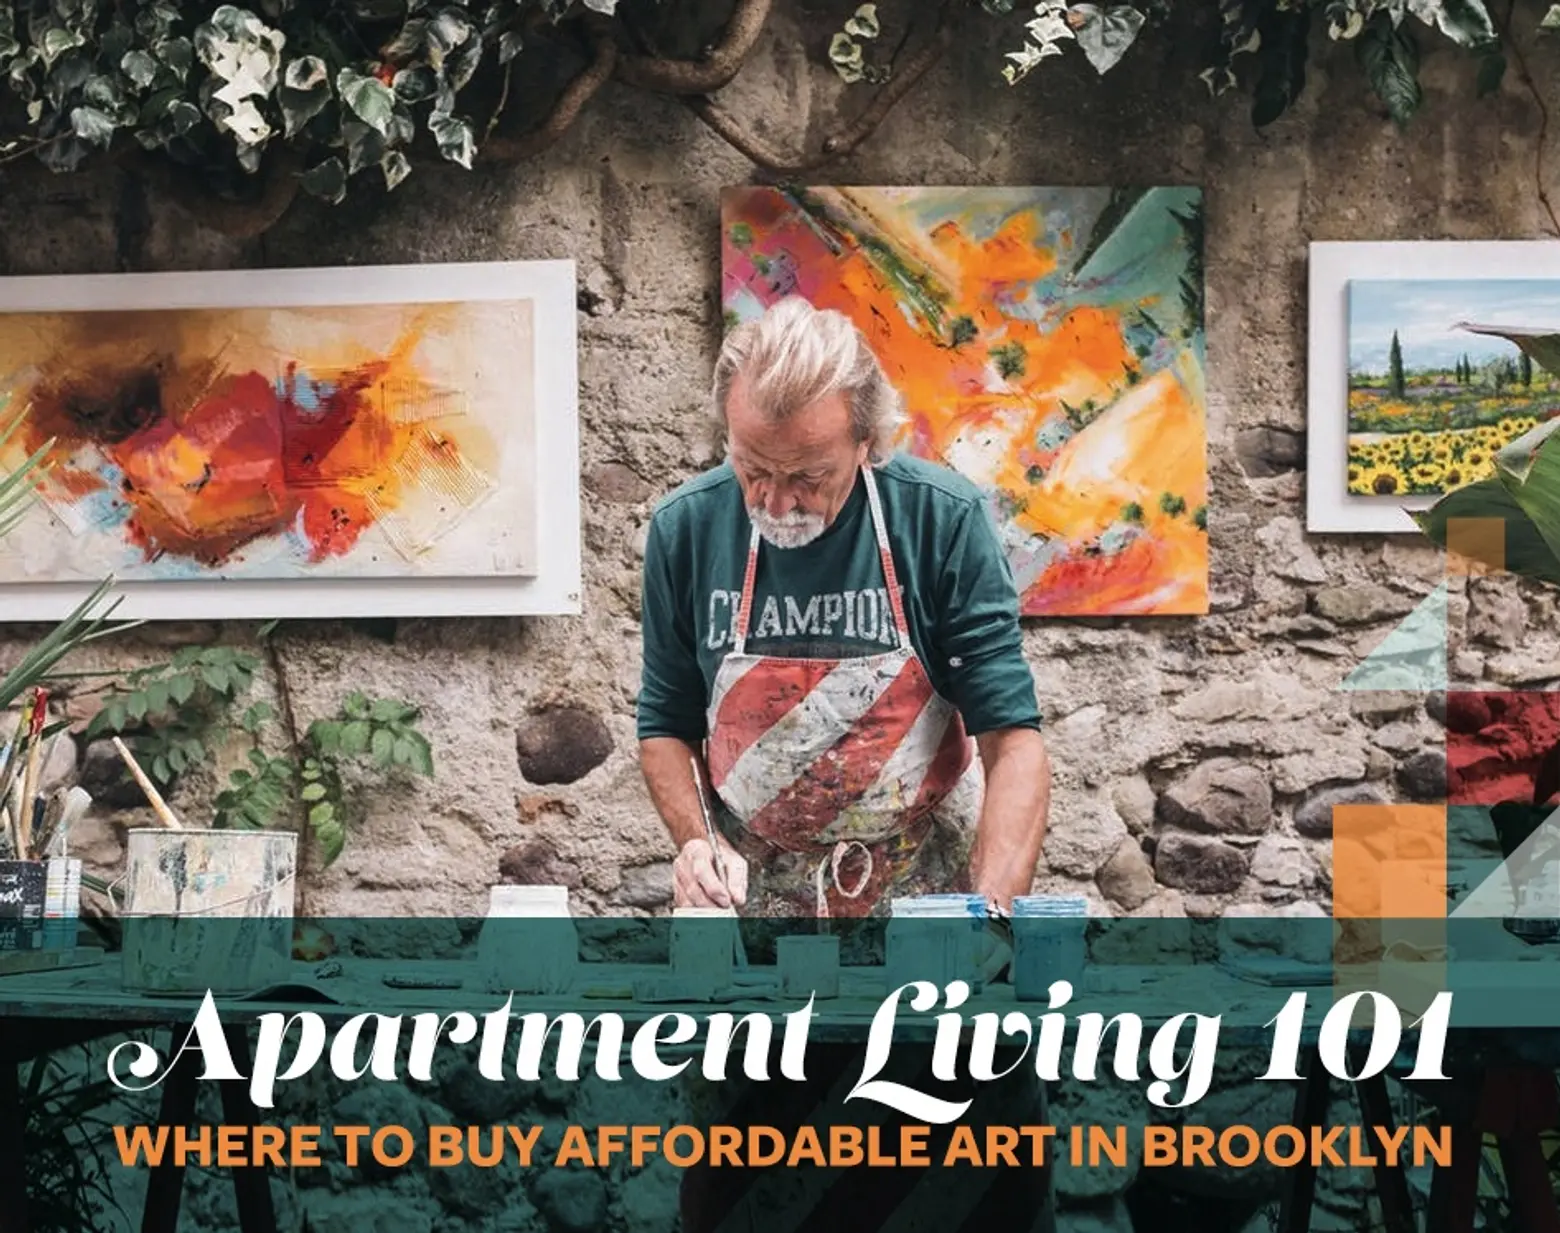 Where to buy affordable art in Brooklyn